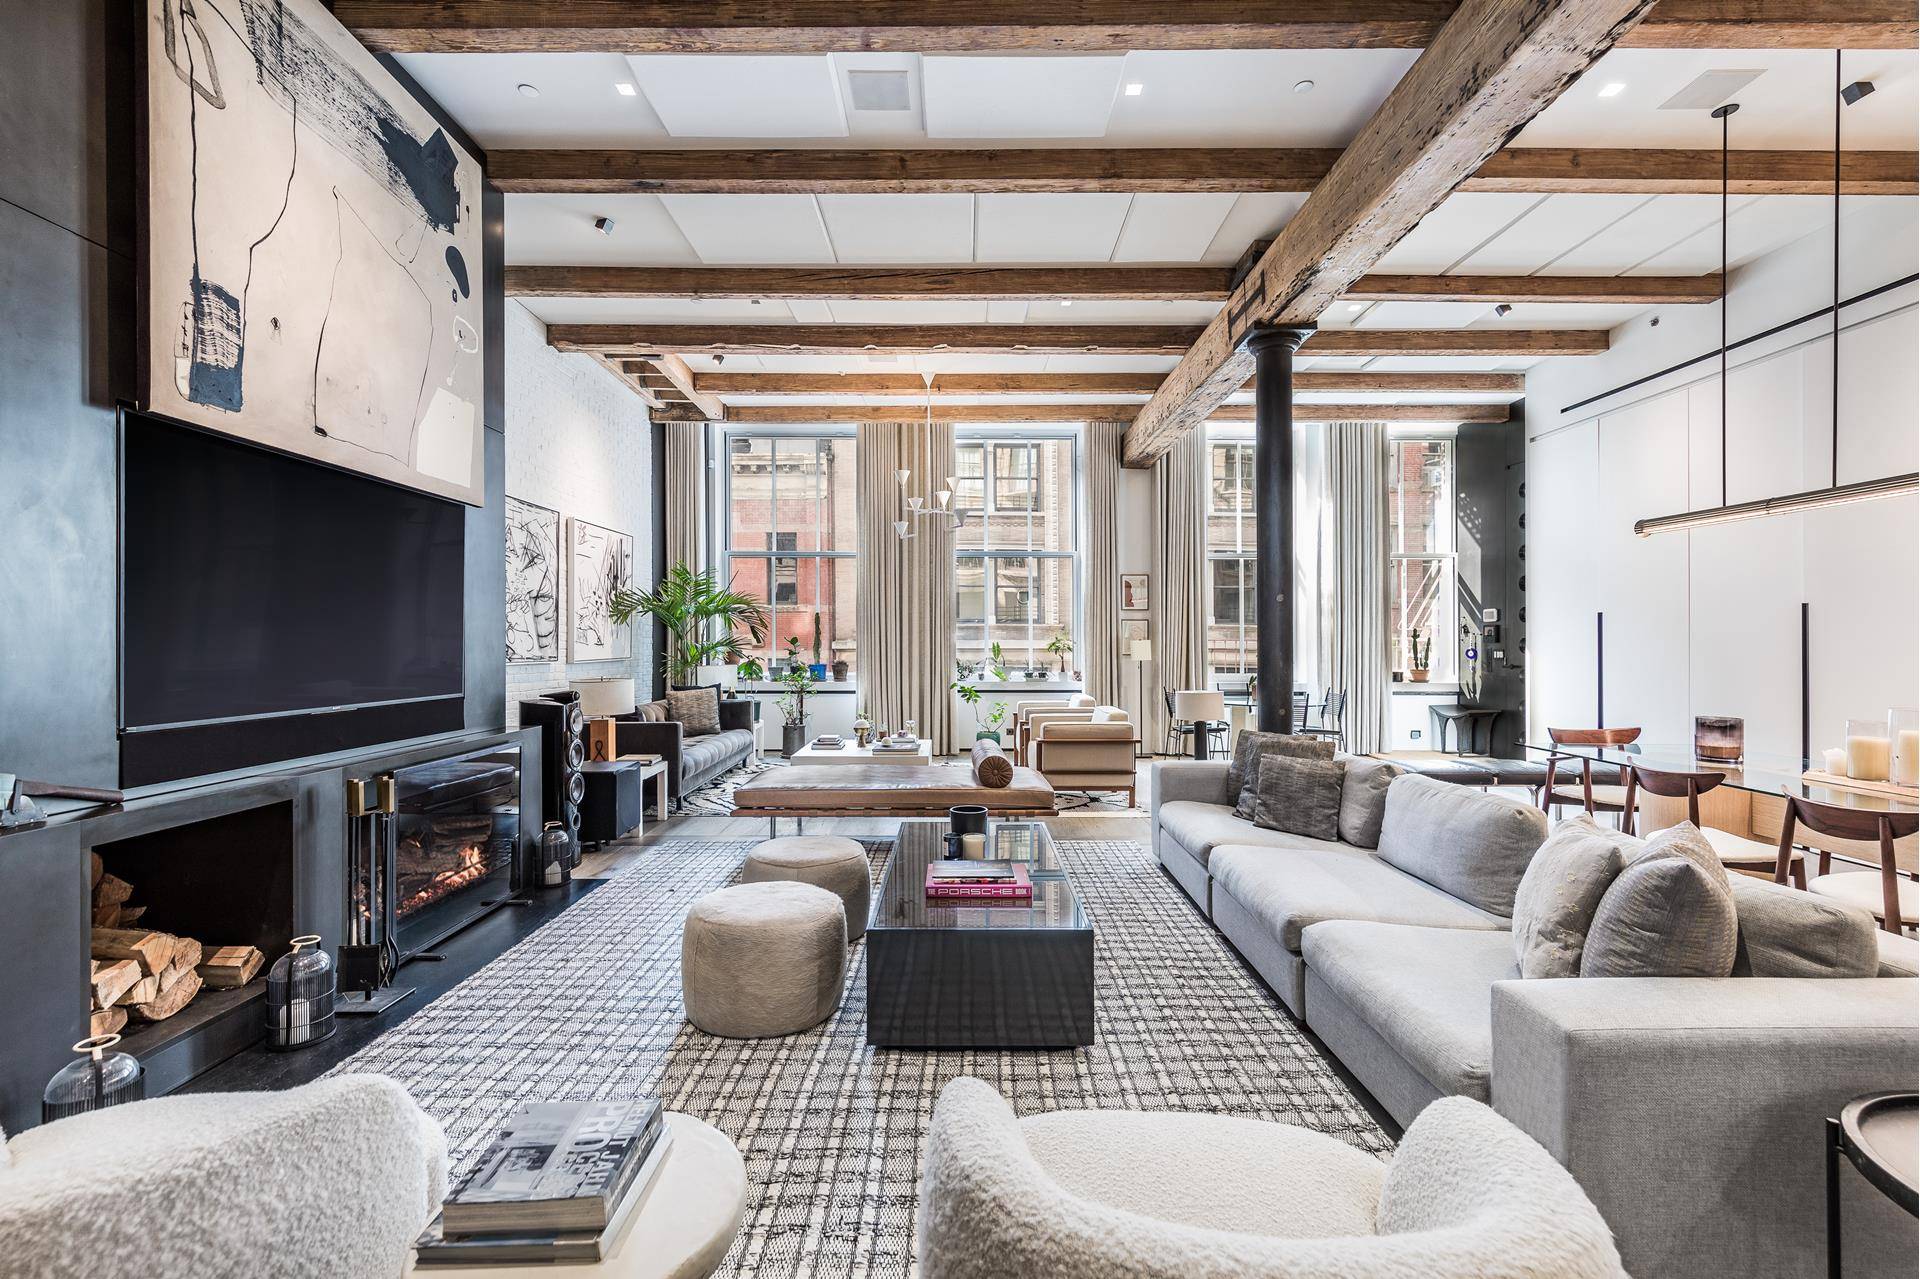 This spectacular loft in the heart of SoHo was completely gut renovated in 2017, elevating the home to a sophisticated standard of style and luxury.